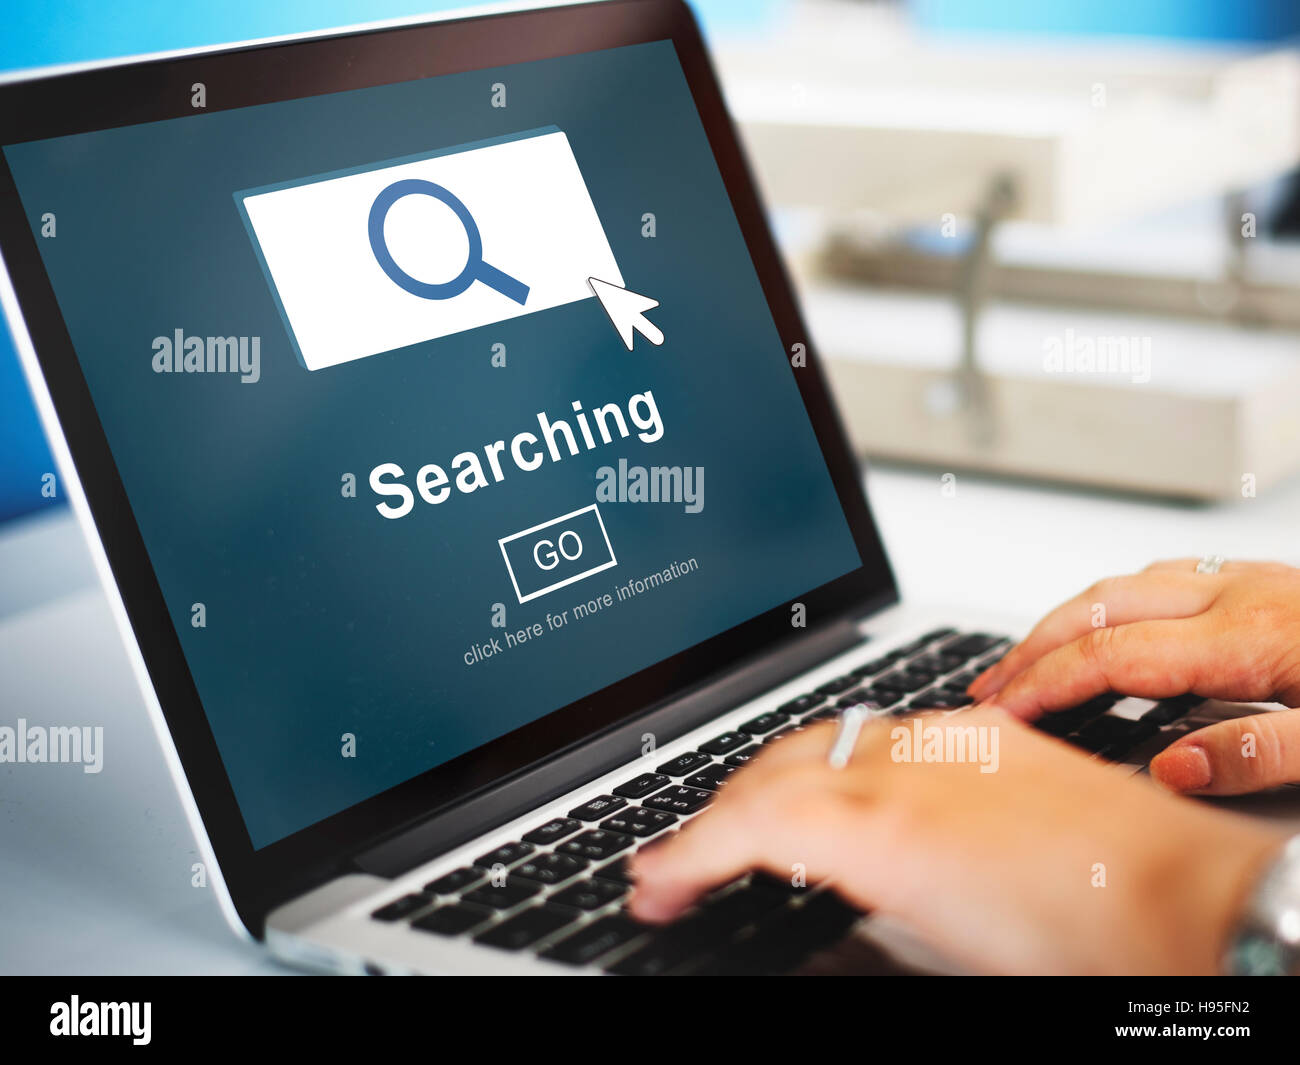 Searching SEO Homepage Navigation Information Concept Stock Photo